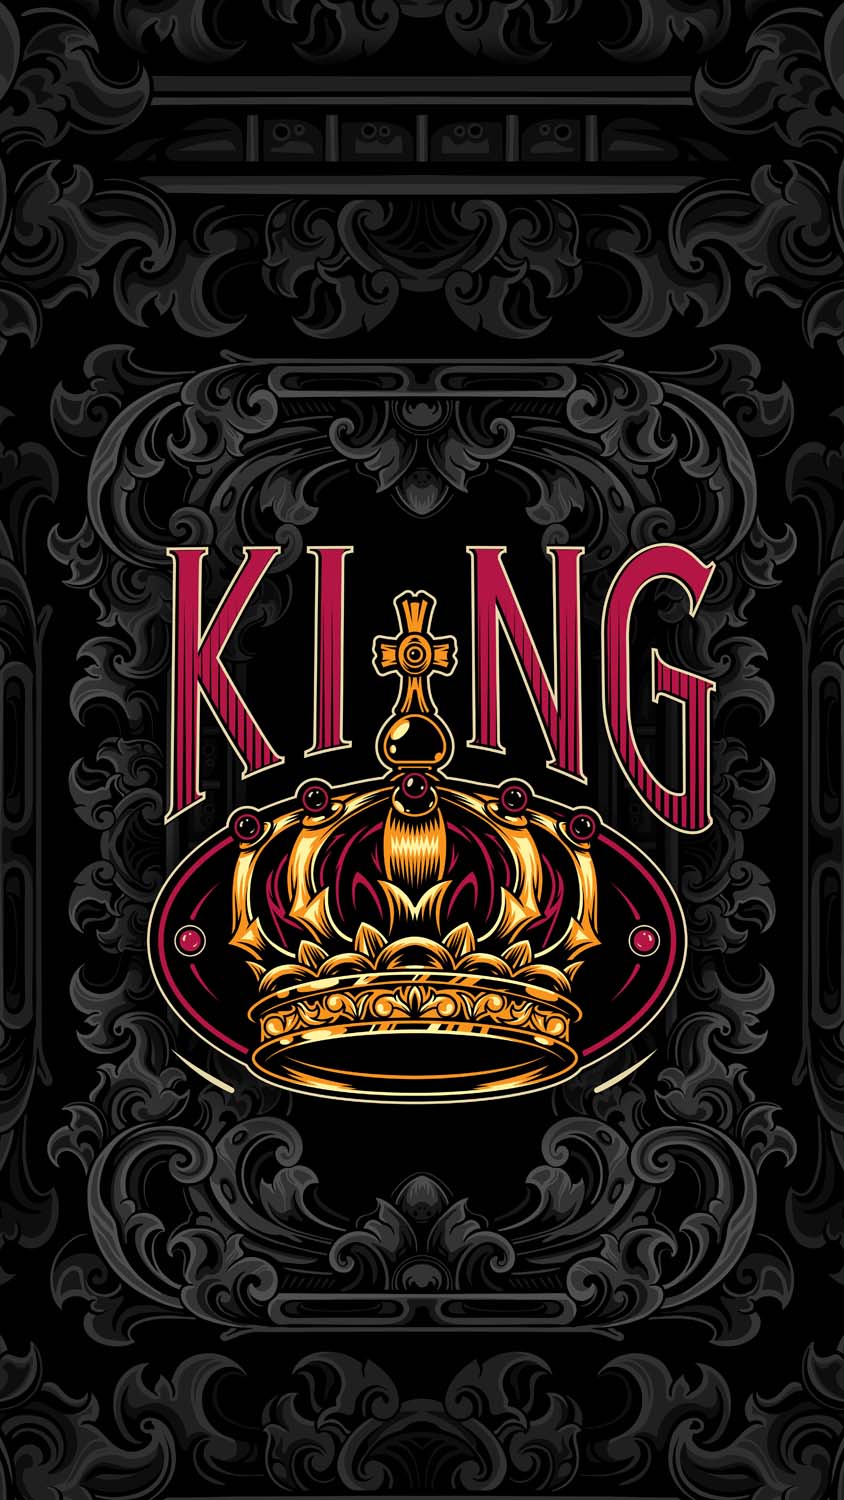 King Crown IPhone Wallpaper HD - IPhone Wallpapers : iPhone Wallpapers